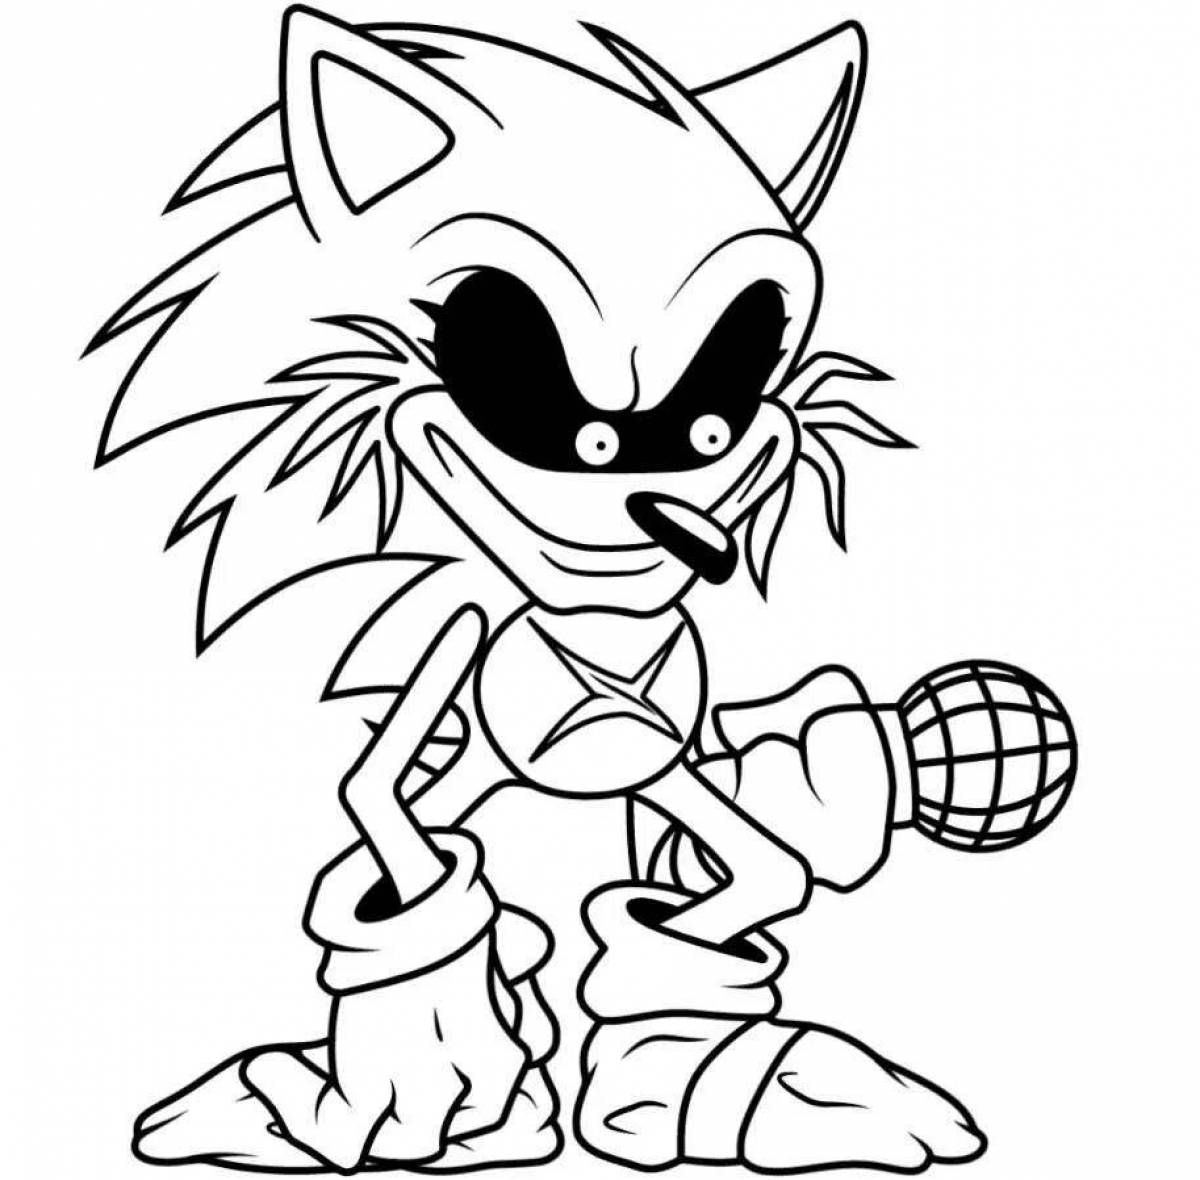 Cute sonic exe coloring book for kids